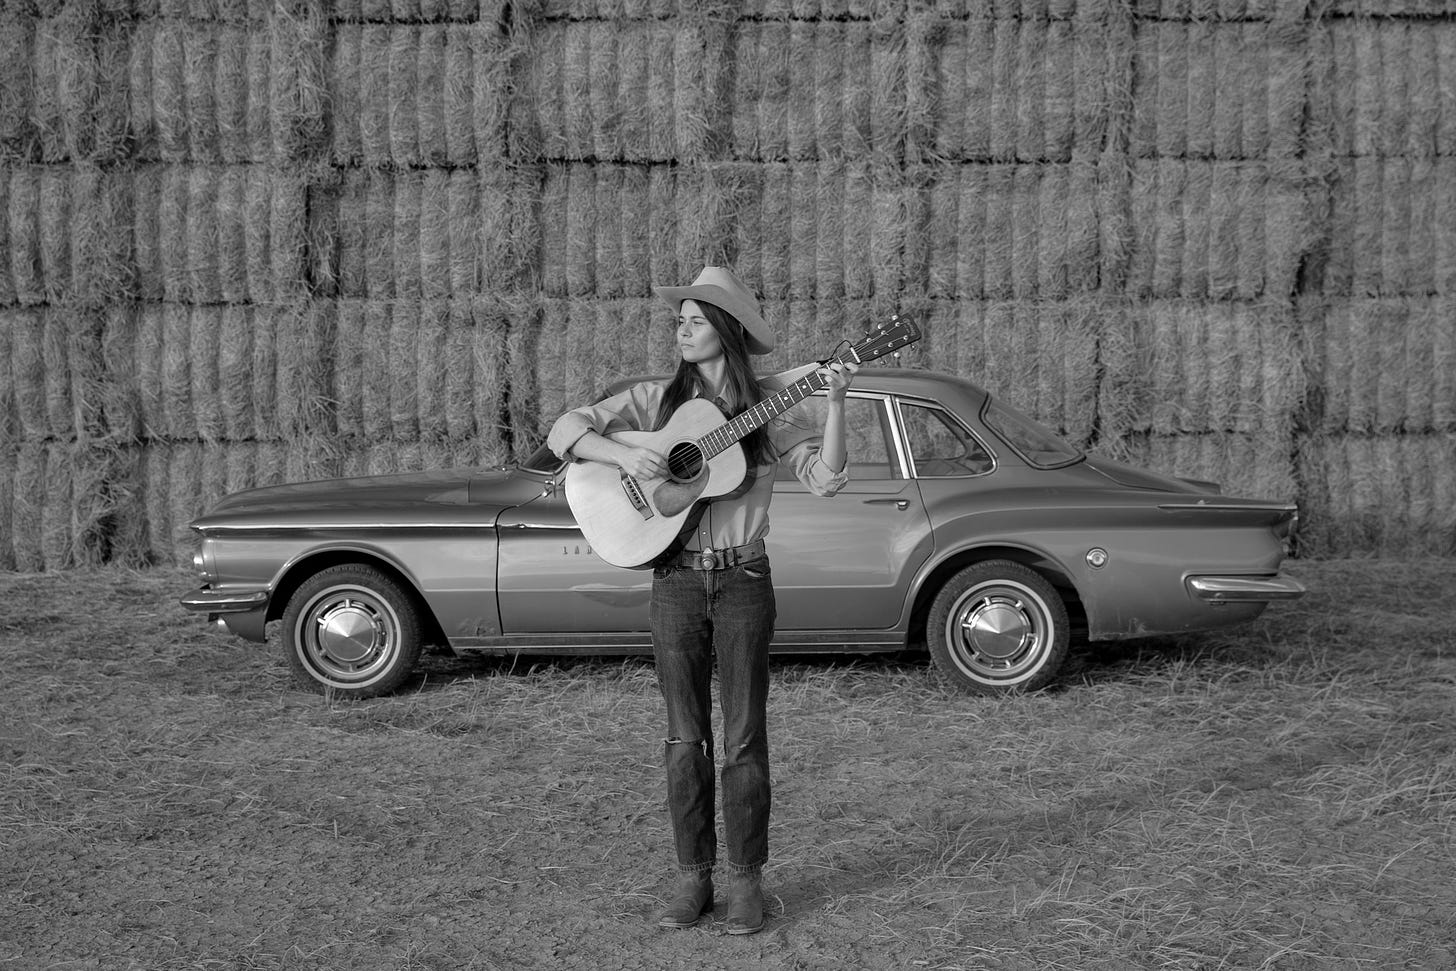 black white photo of woman with guitar in front of car and bales of hay